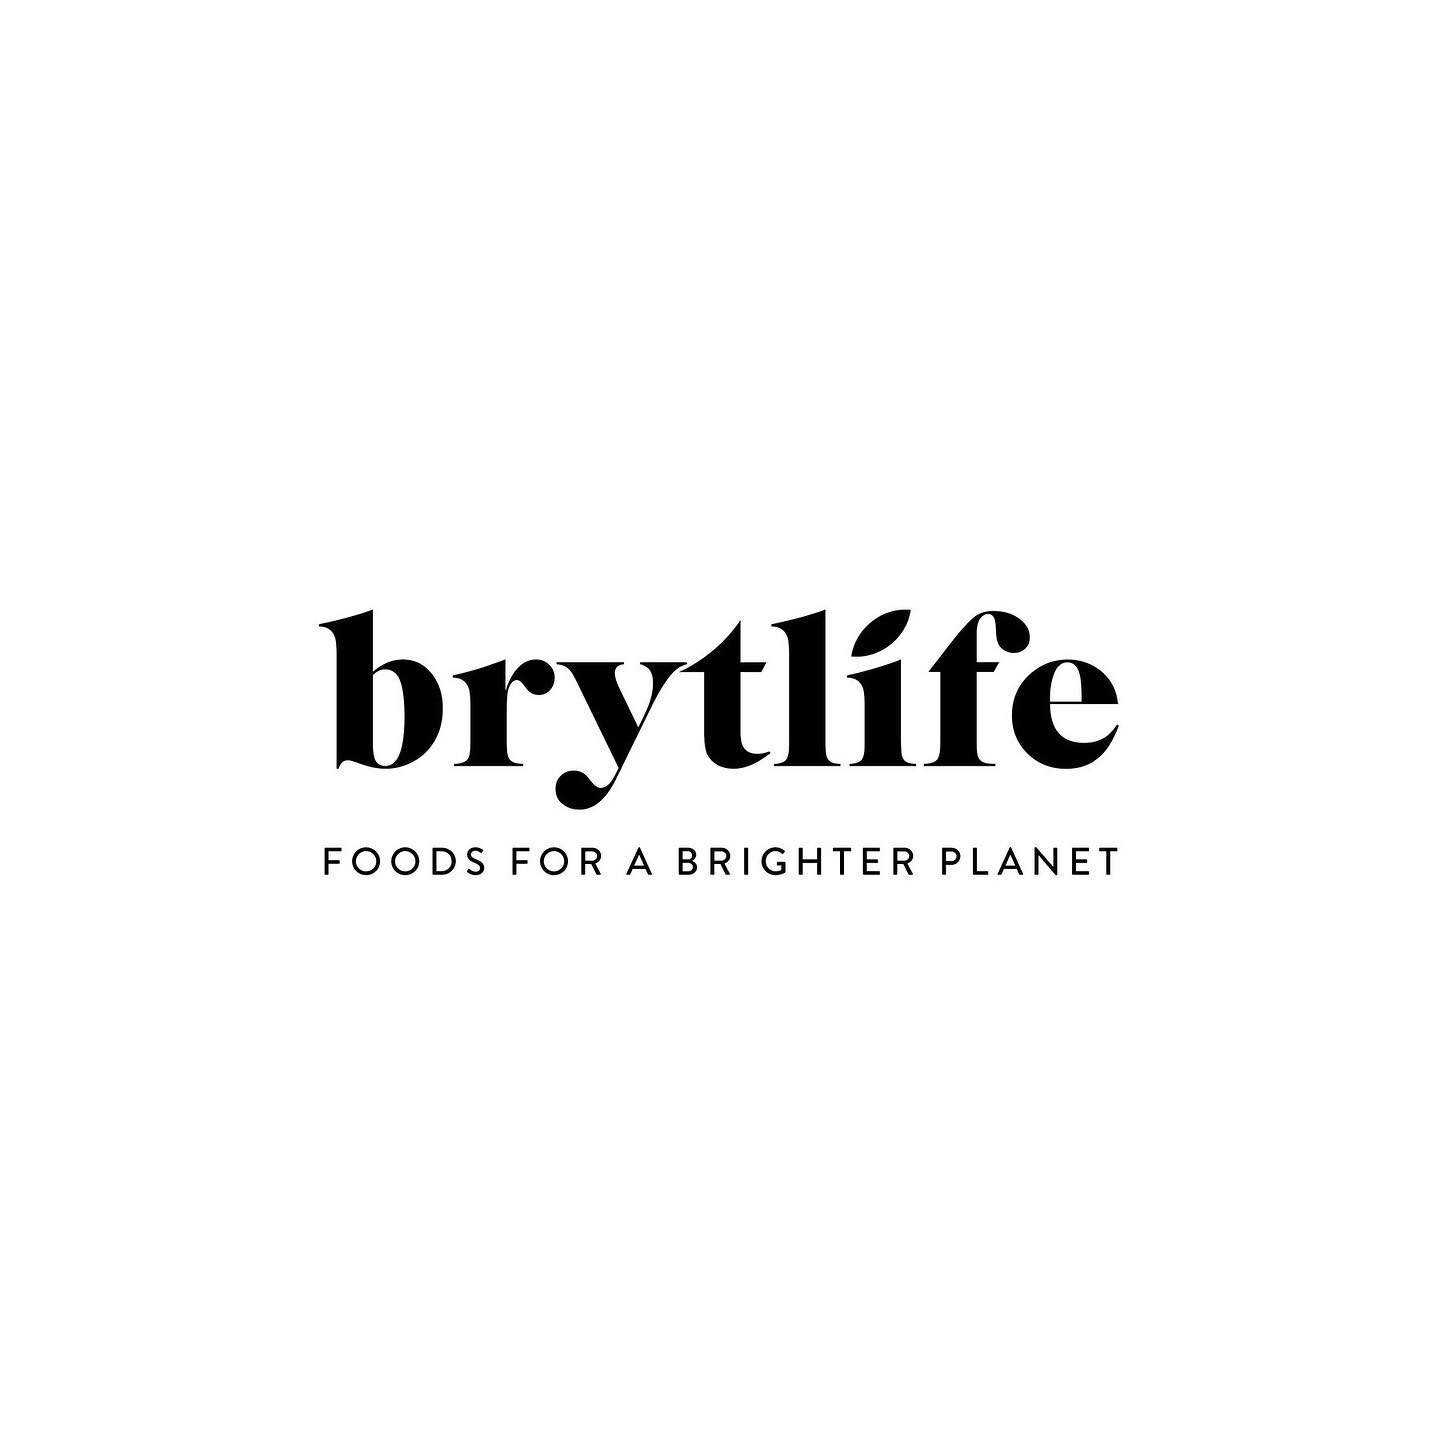 Brytlife Foods specializes in delicious, creamy dairy-free products. &nbsp;Brytlife began in 2014 when Lita Dwight, an animal adoring vegan foodie, wanted to create a product that was delicious, decadent and decidedly kinder than traditional dairy yo